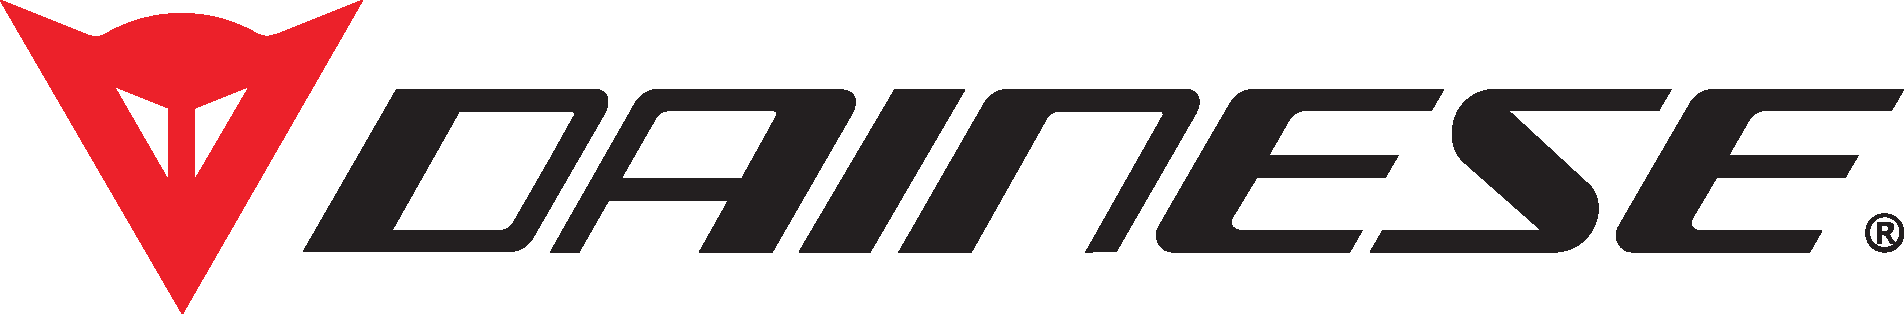 Dainese Logo - Dainese Logo Vector Free Download